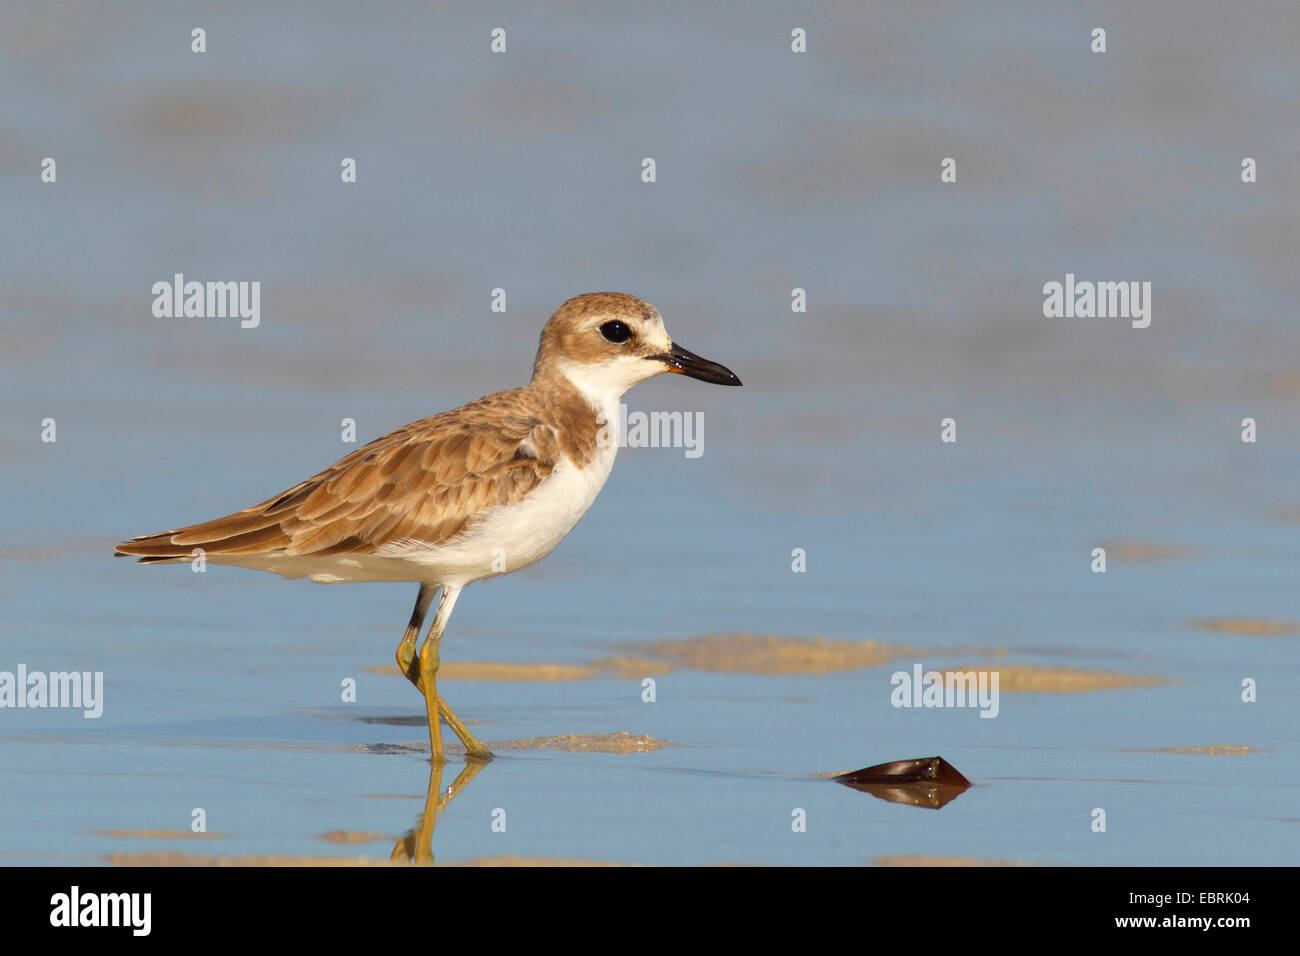 great sand plover (Charadrius leschenaultii), immature stands in shallow water at the beach, Seychelles, Praslin Stock Photo